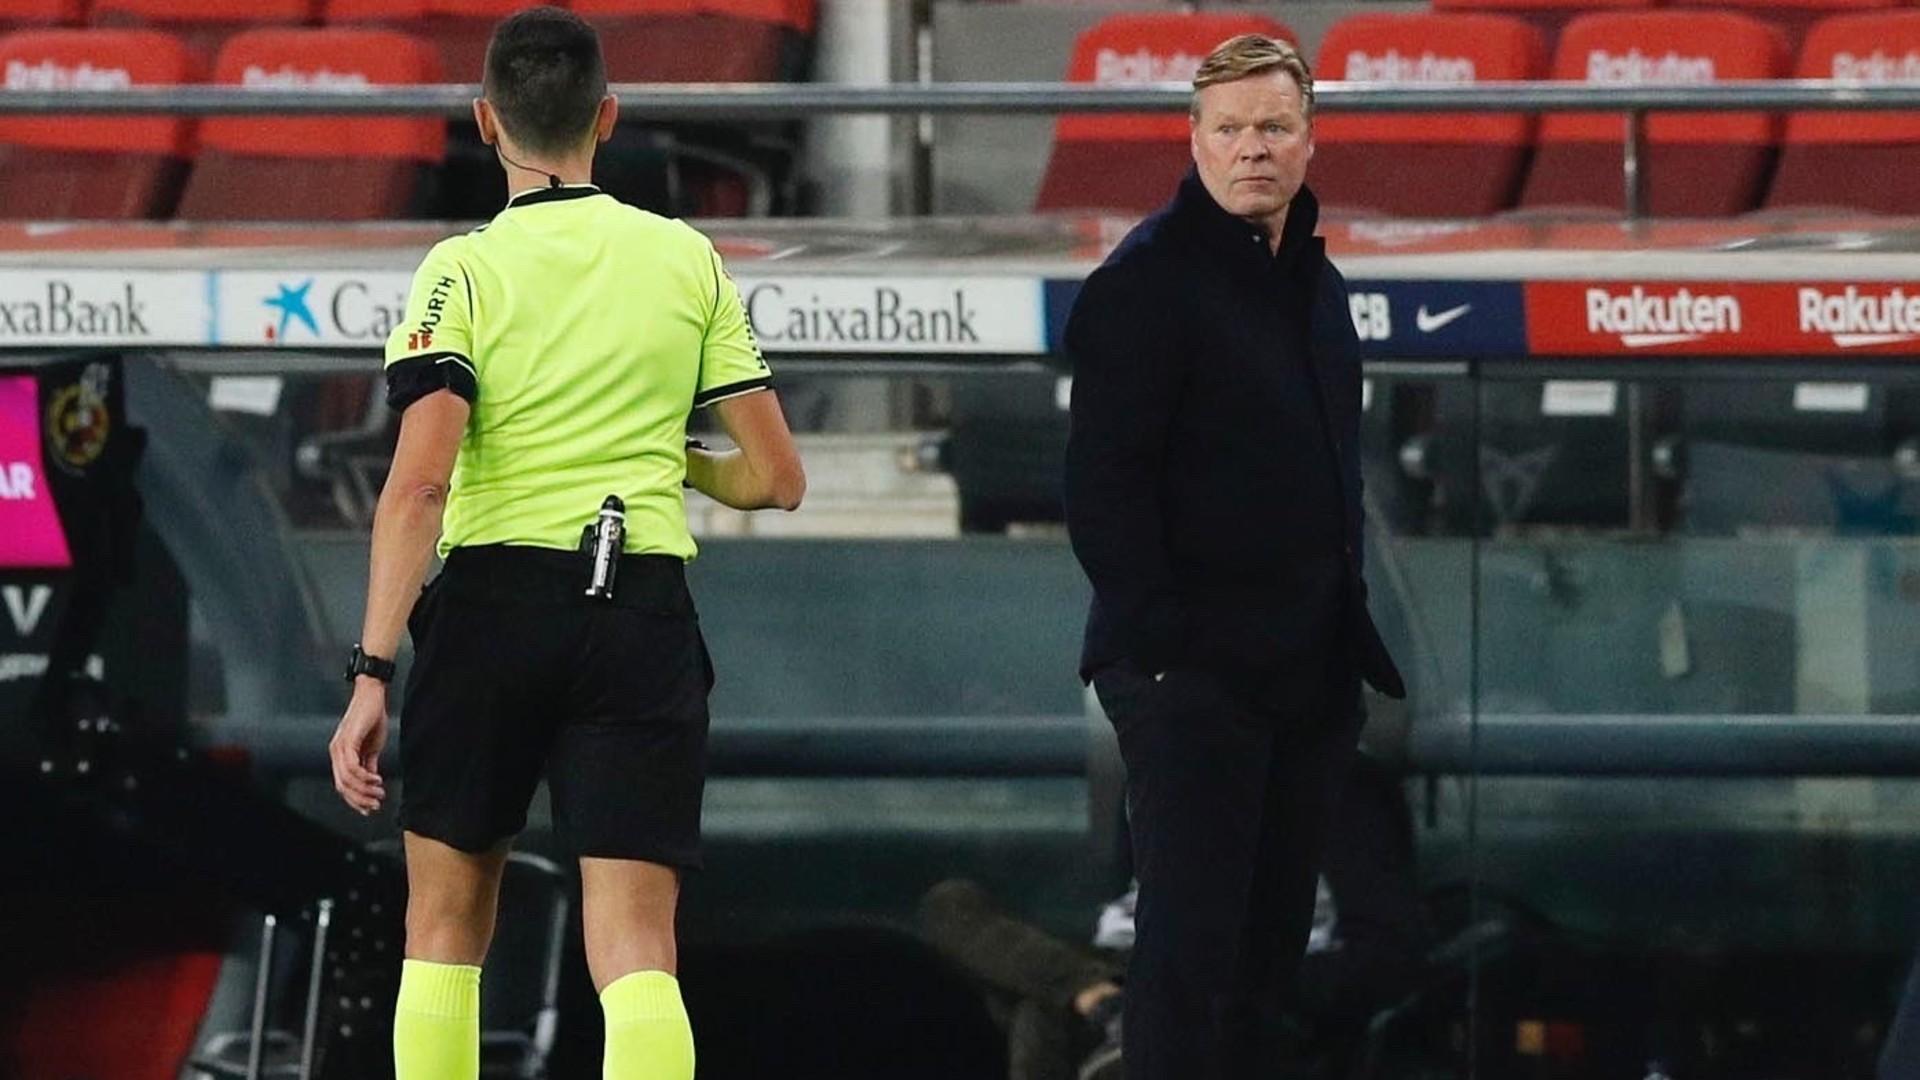 Ronald Koeman unhappy with the refereeing in the El Clasico; credits:twitter/@FCBarcelona